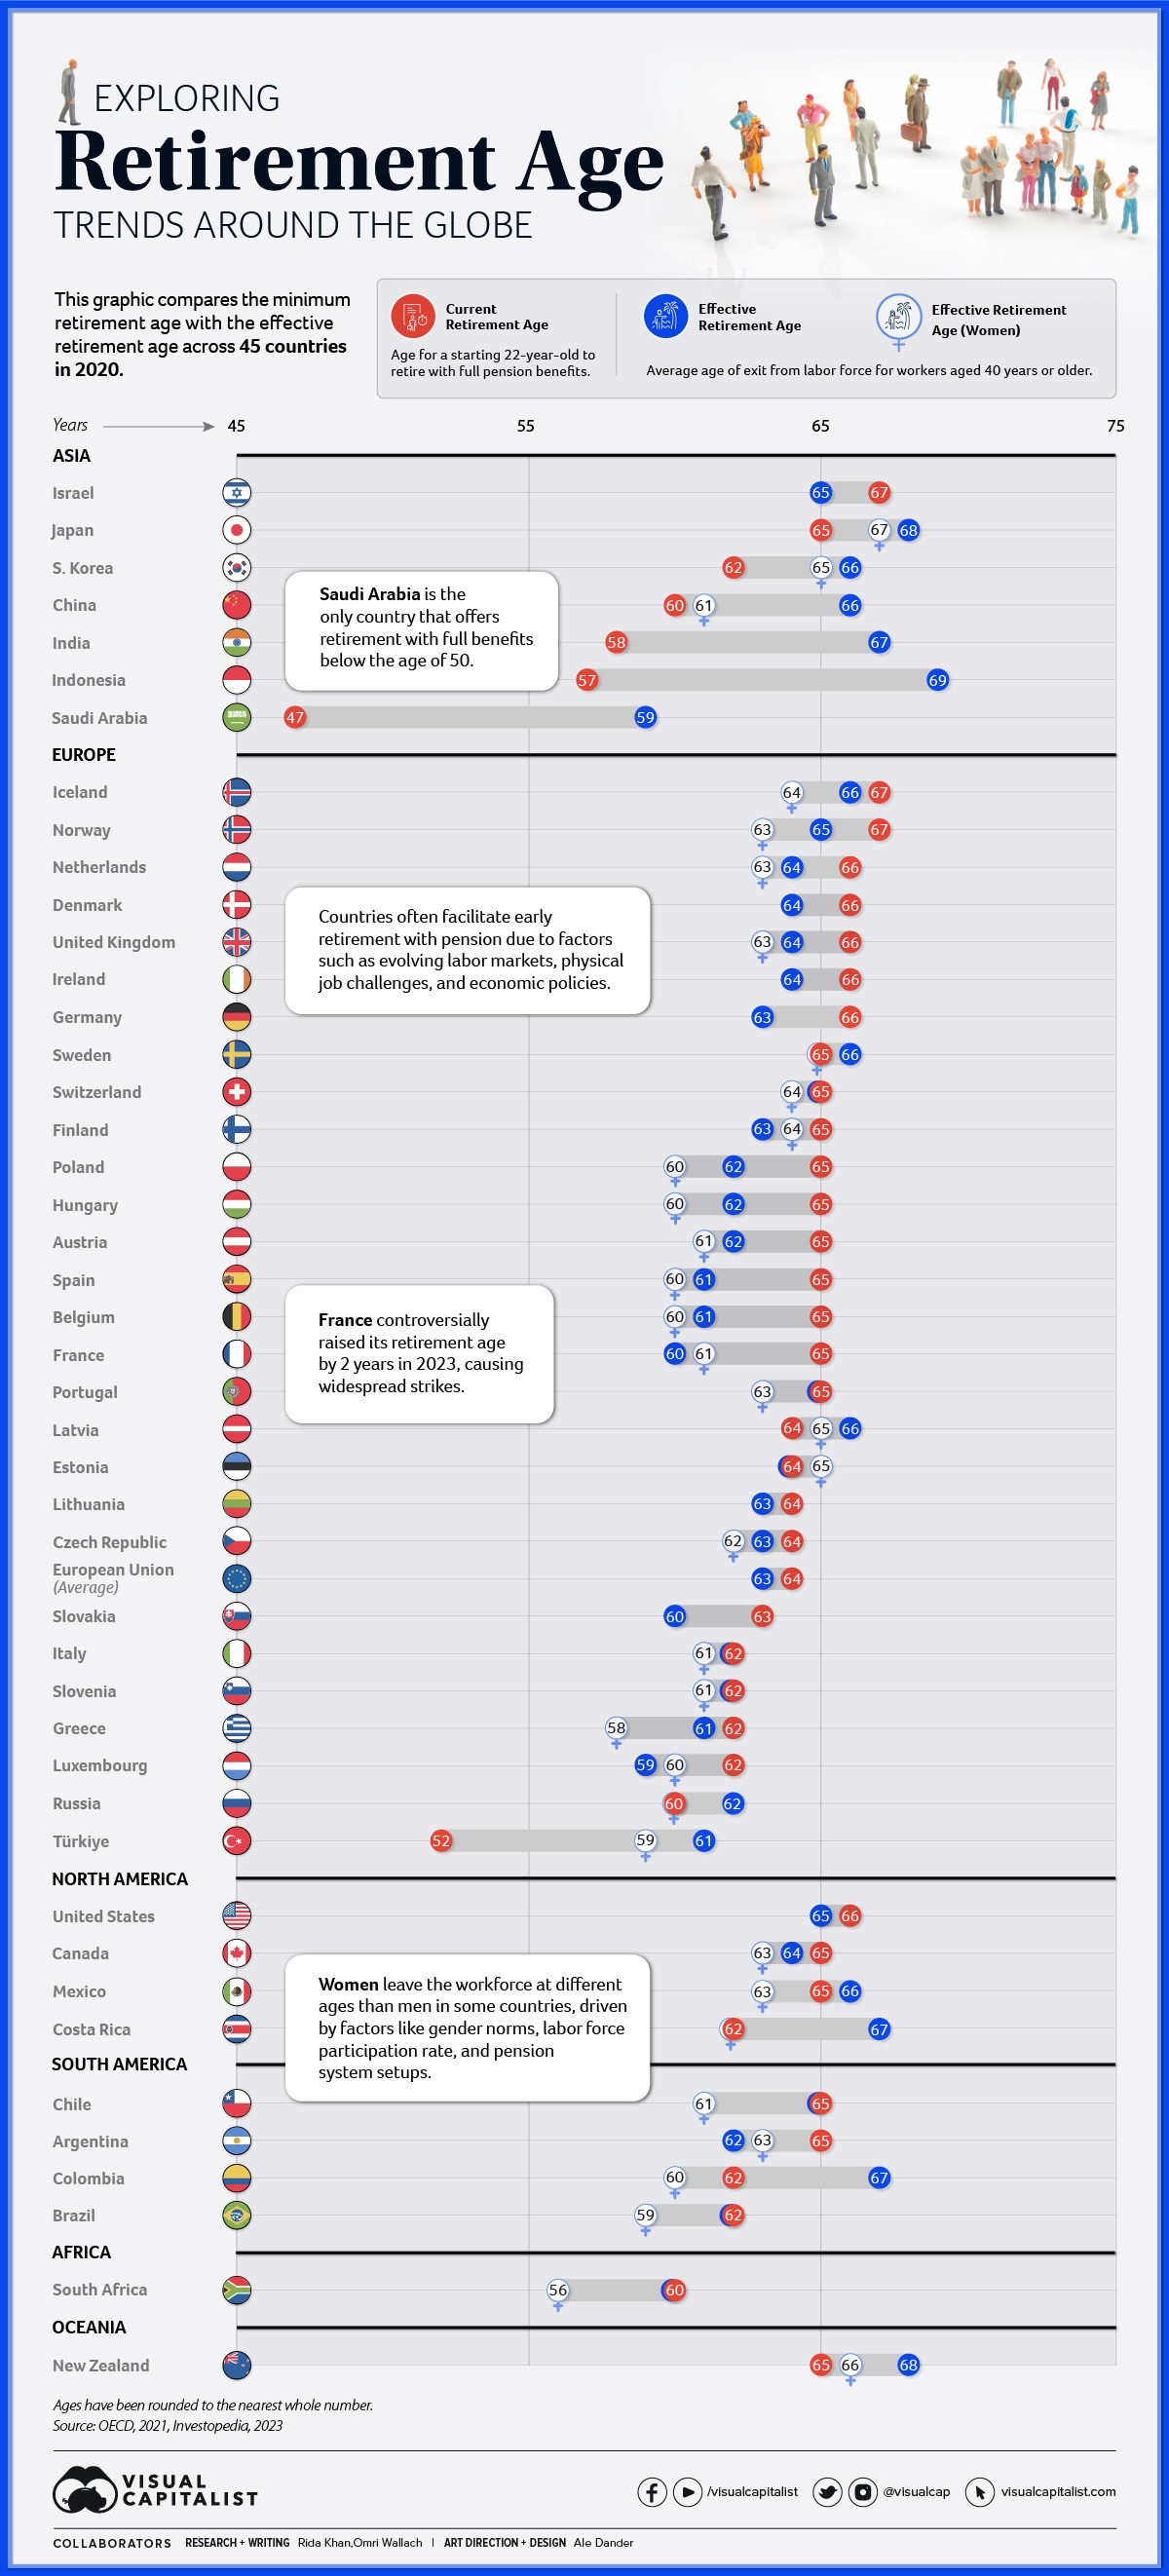 Retirement-Age-by-Country-and-Gender-v2.jpg